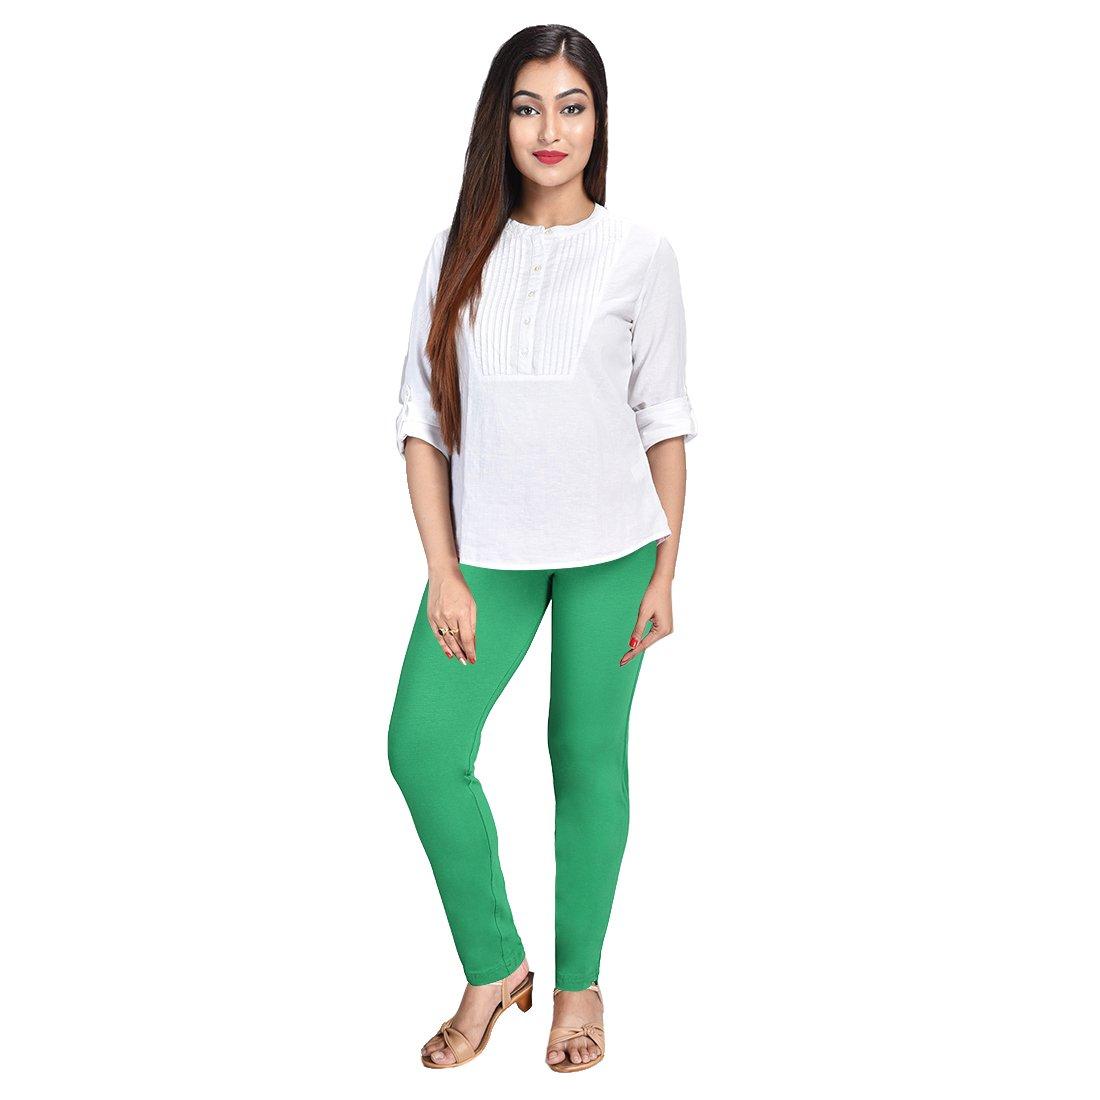 Femina Raigarh - Comfort Lady All Products & All Color... | Facebook